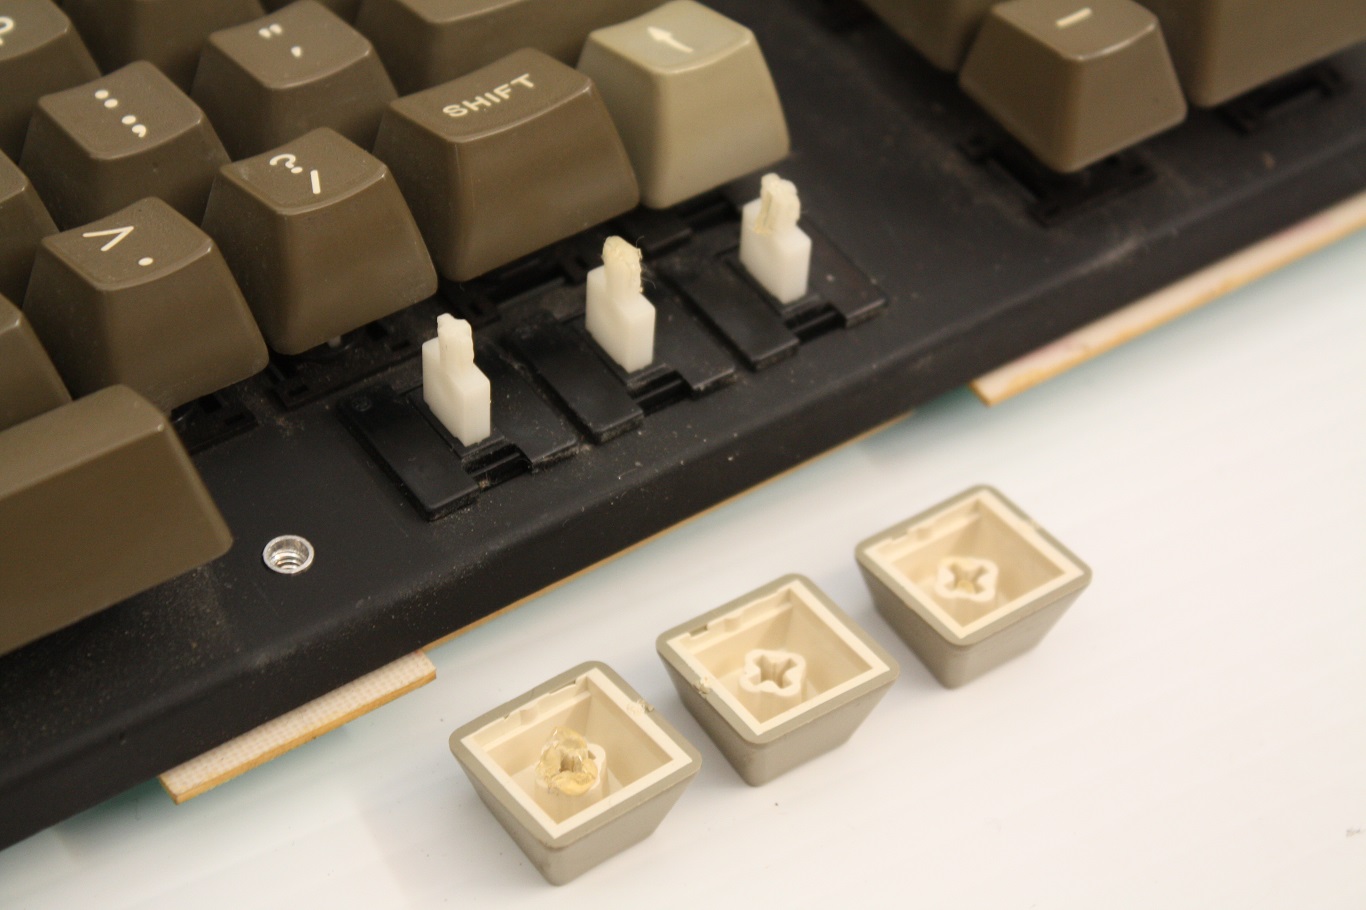 Apple III - double action key caps removed